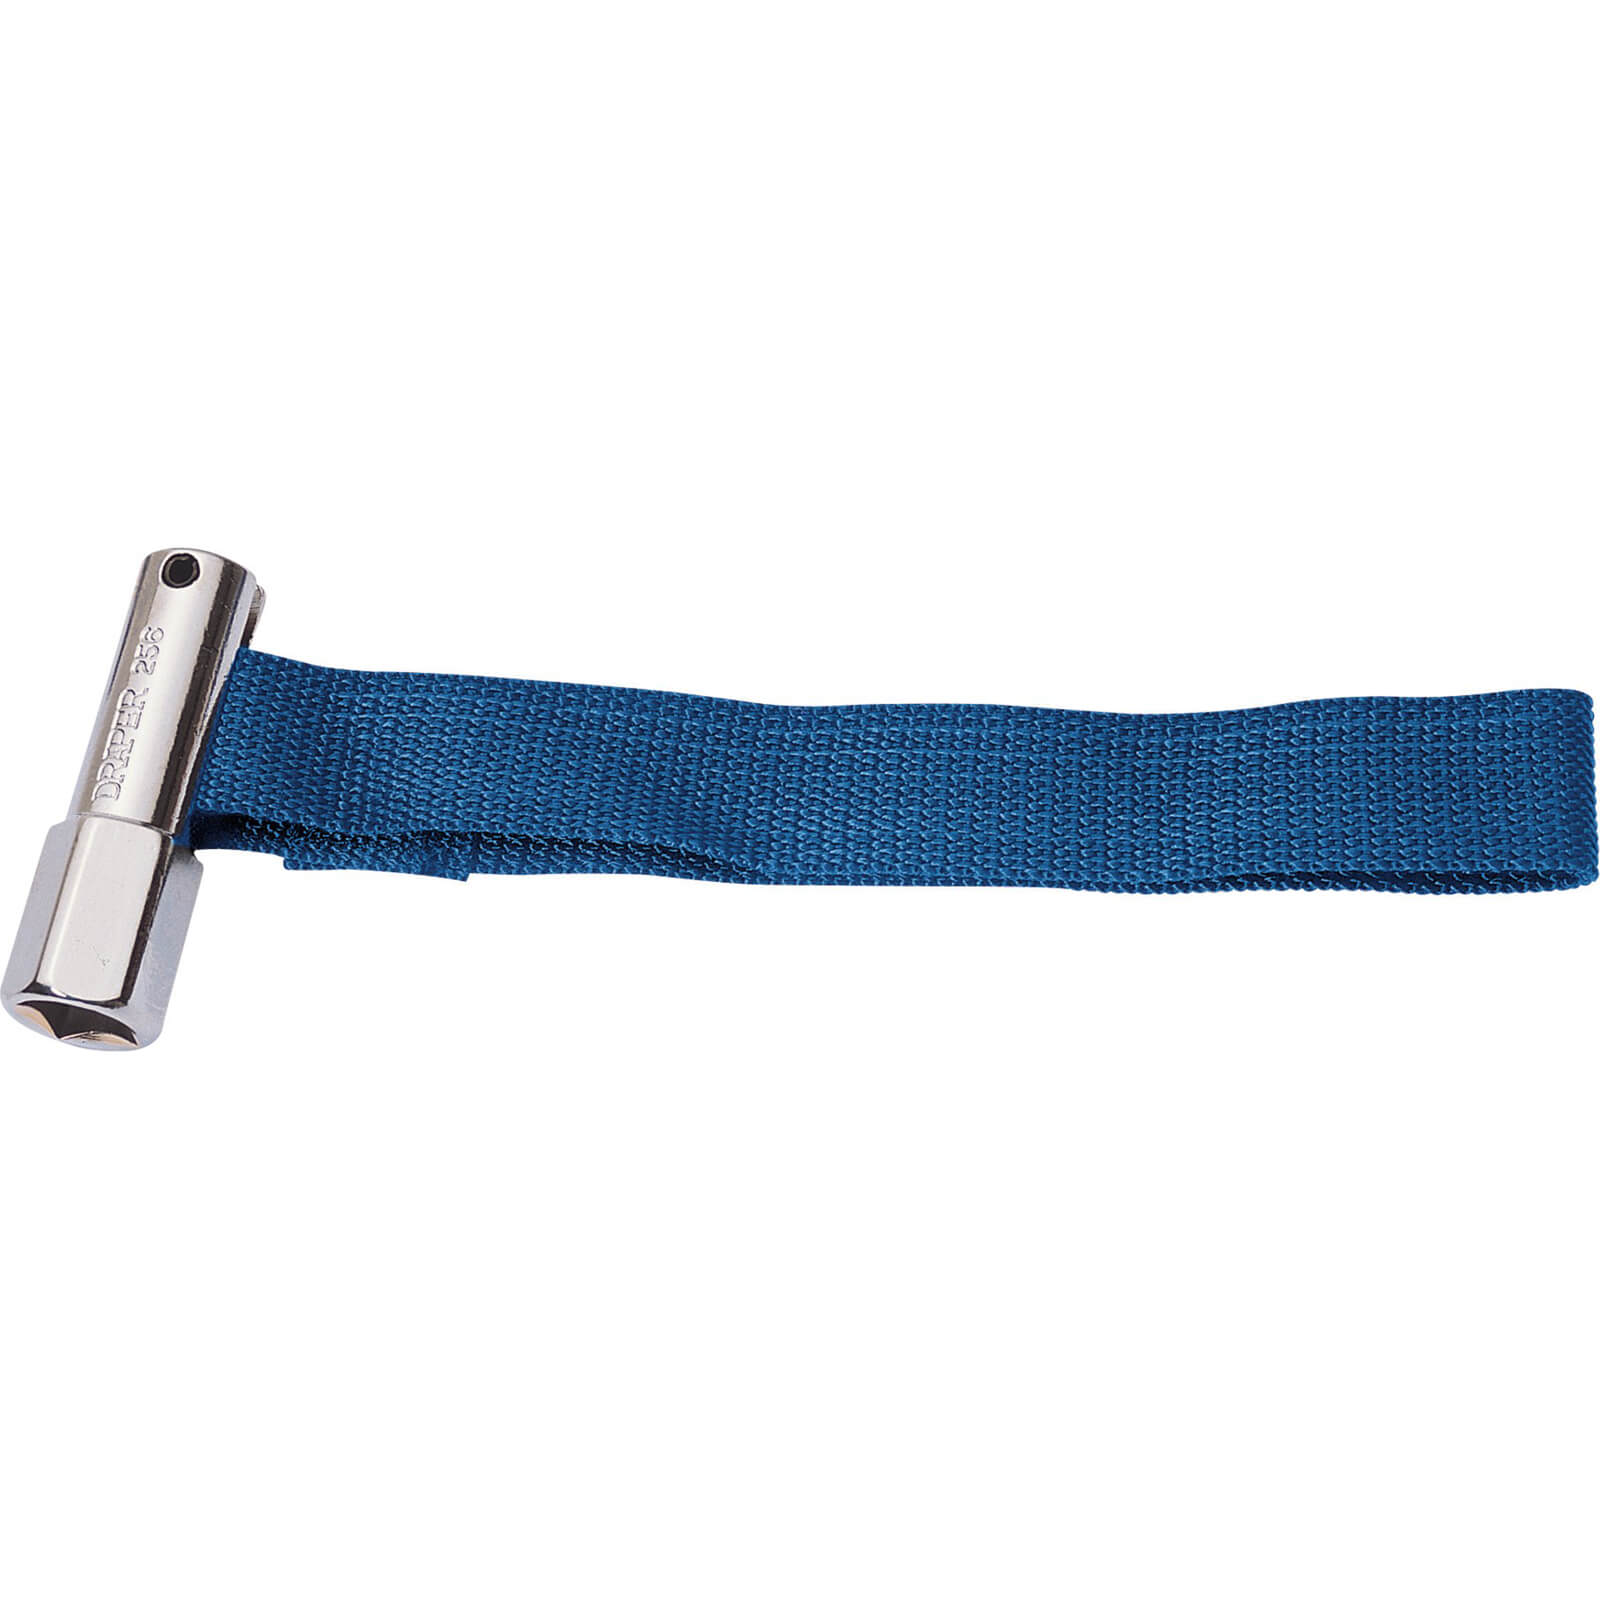 Image of Draper Oil Filter Strap Wrench 0 - 120mm